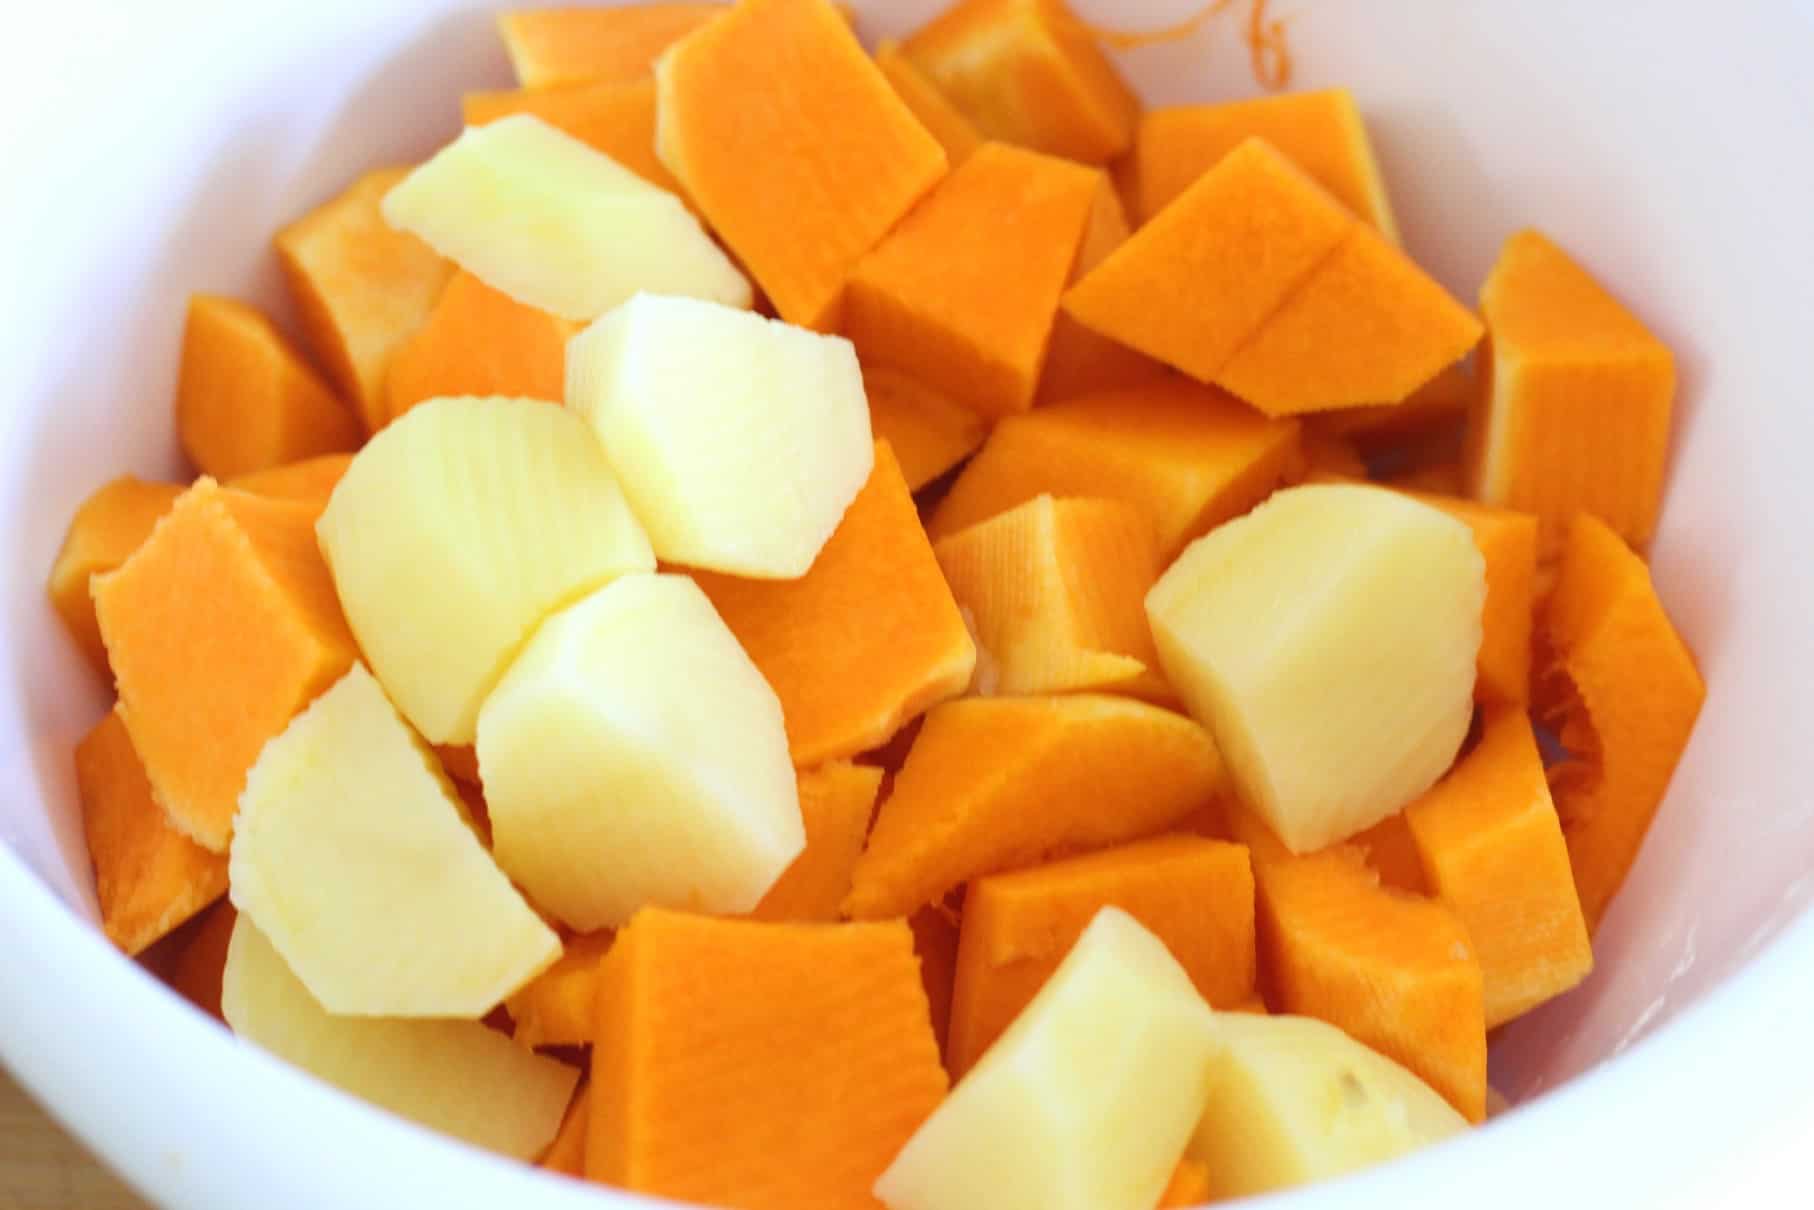 Chopped potatoes and butternut squash ready to cook.